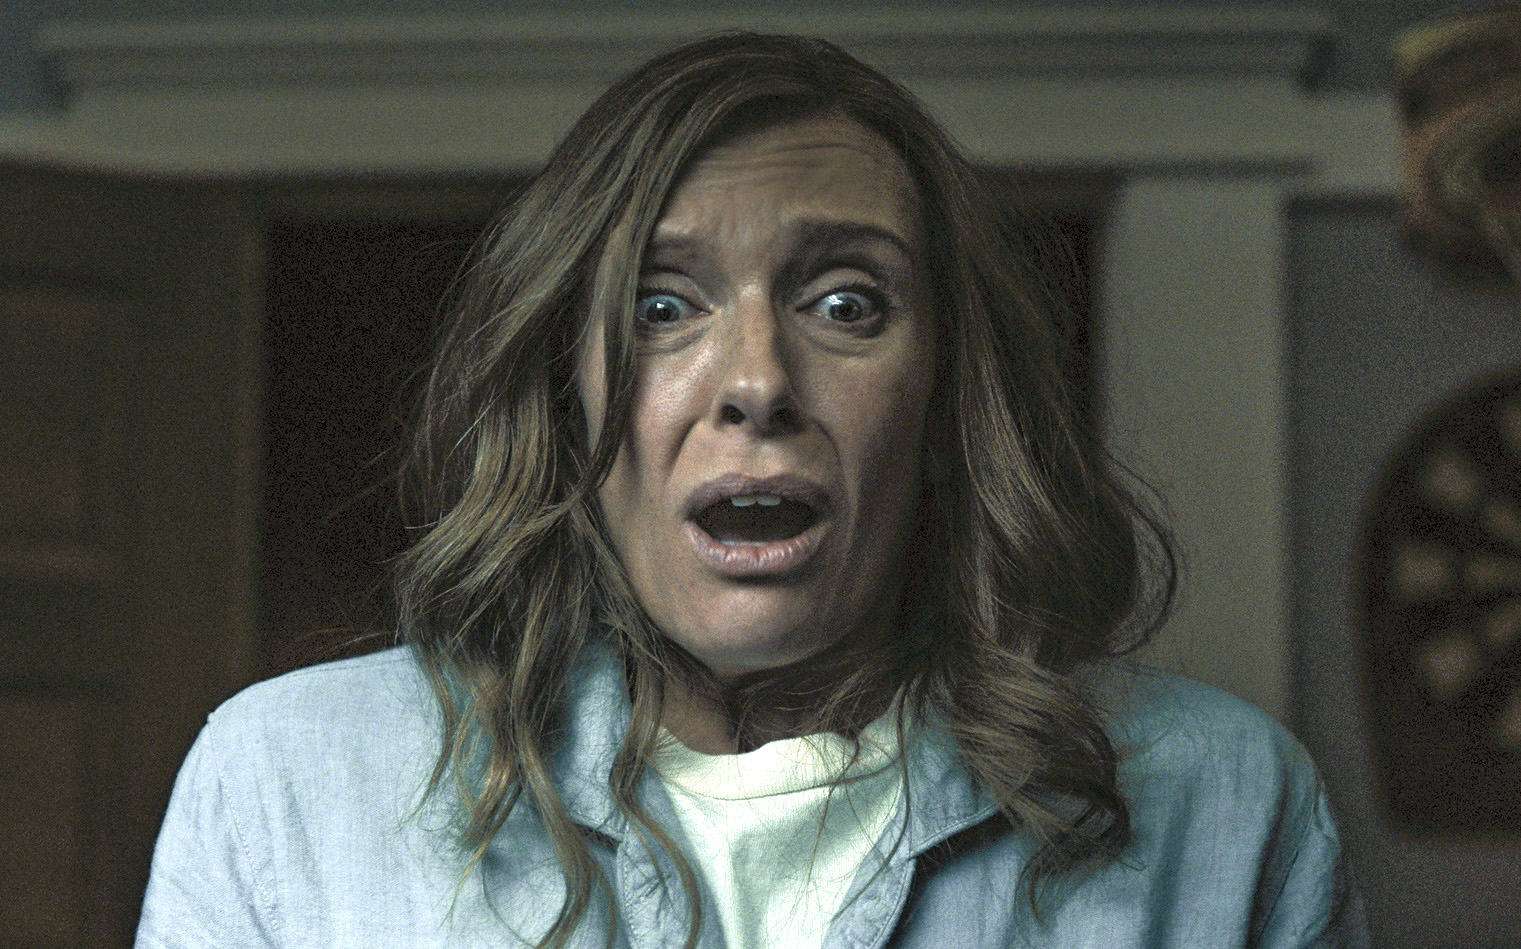 PHOTO: Toni Collette in a scene from "Hereditary."